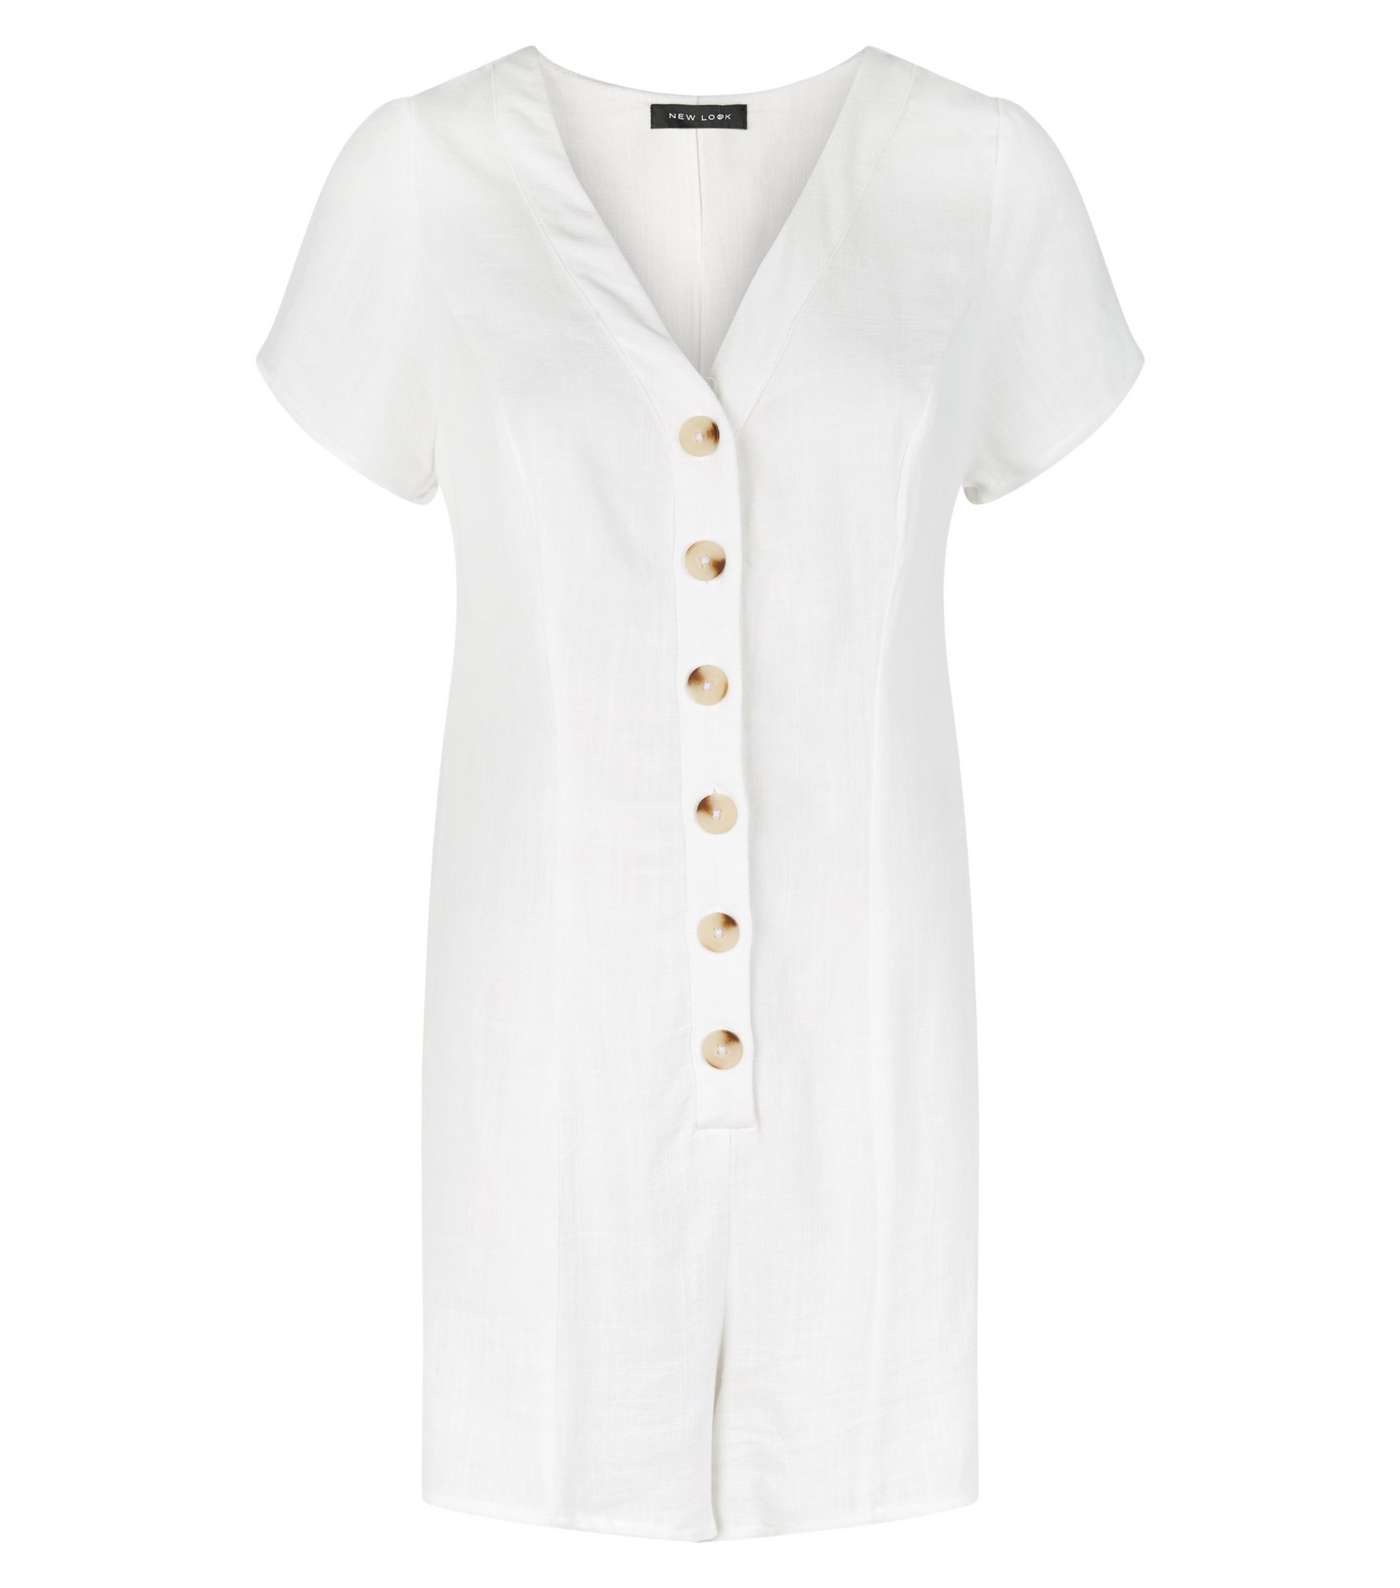 White Linen Look Button Up Playsuit Image 4